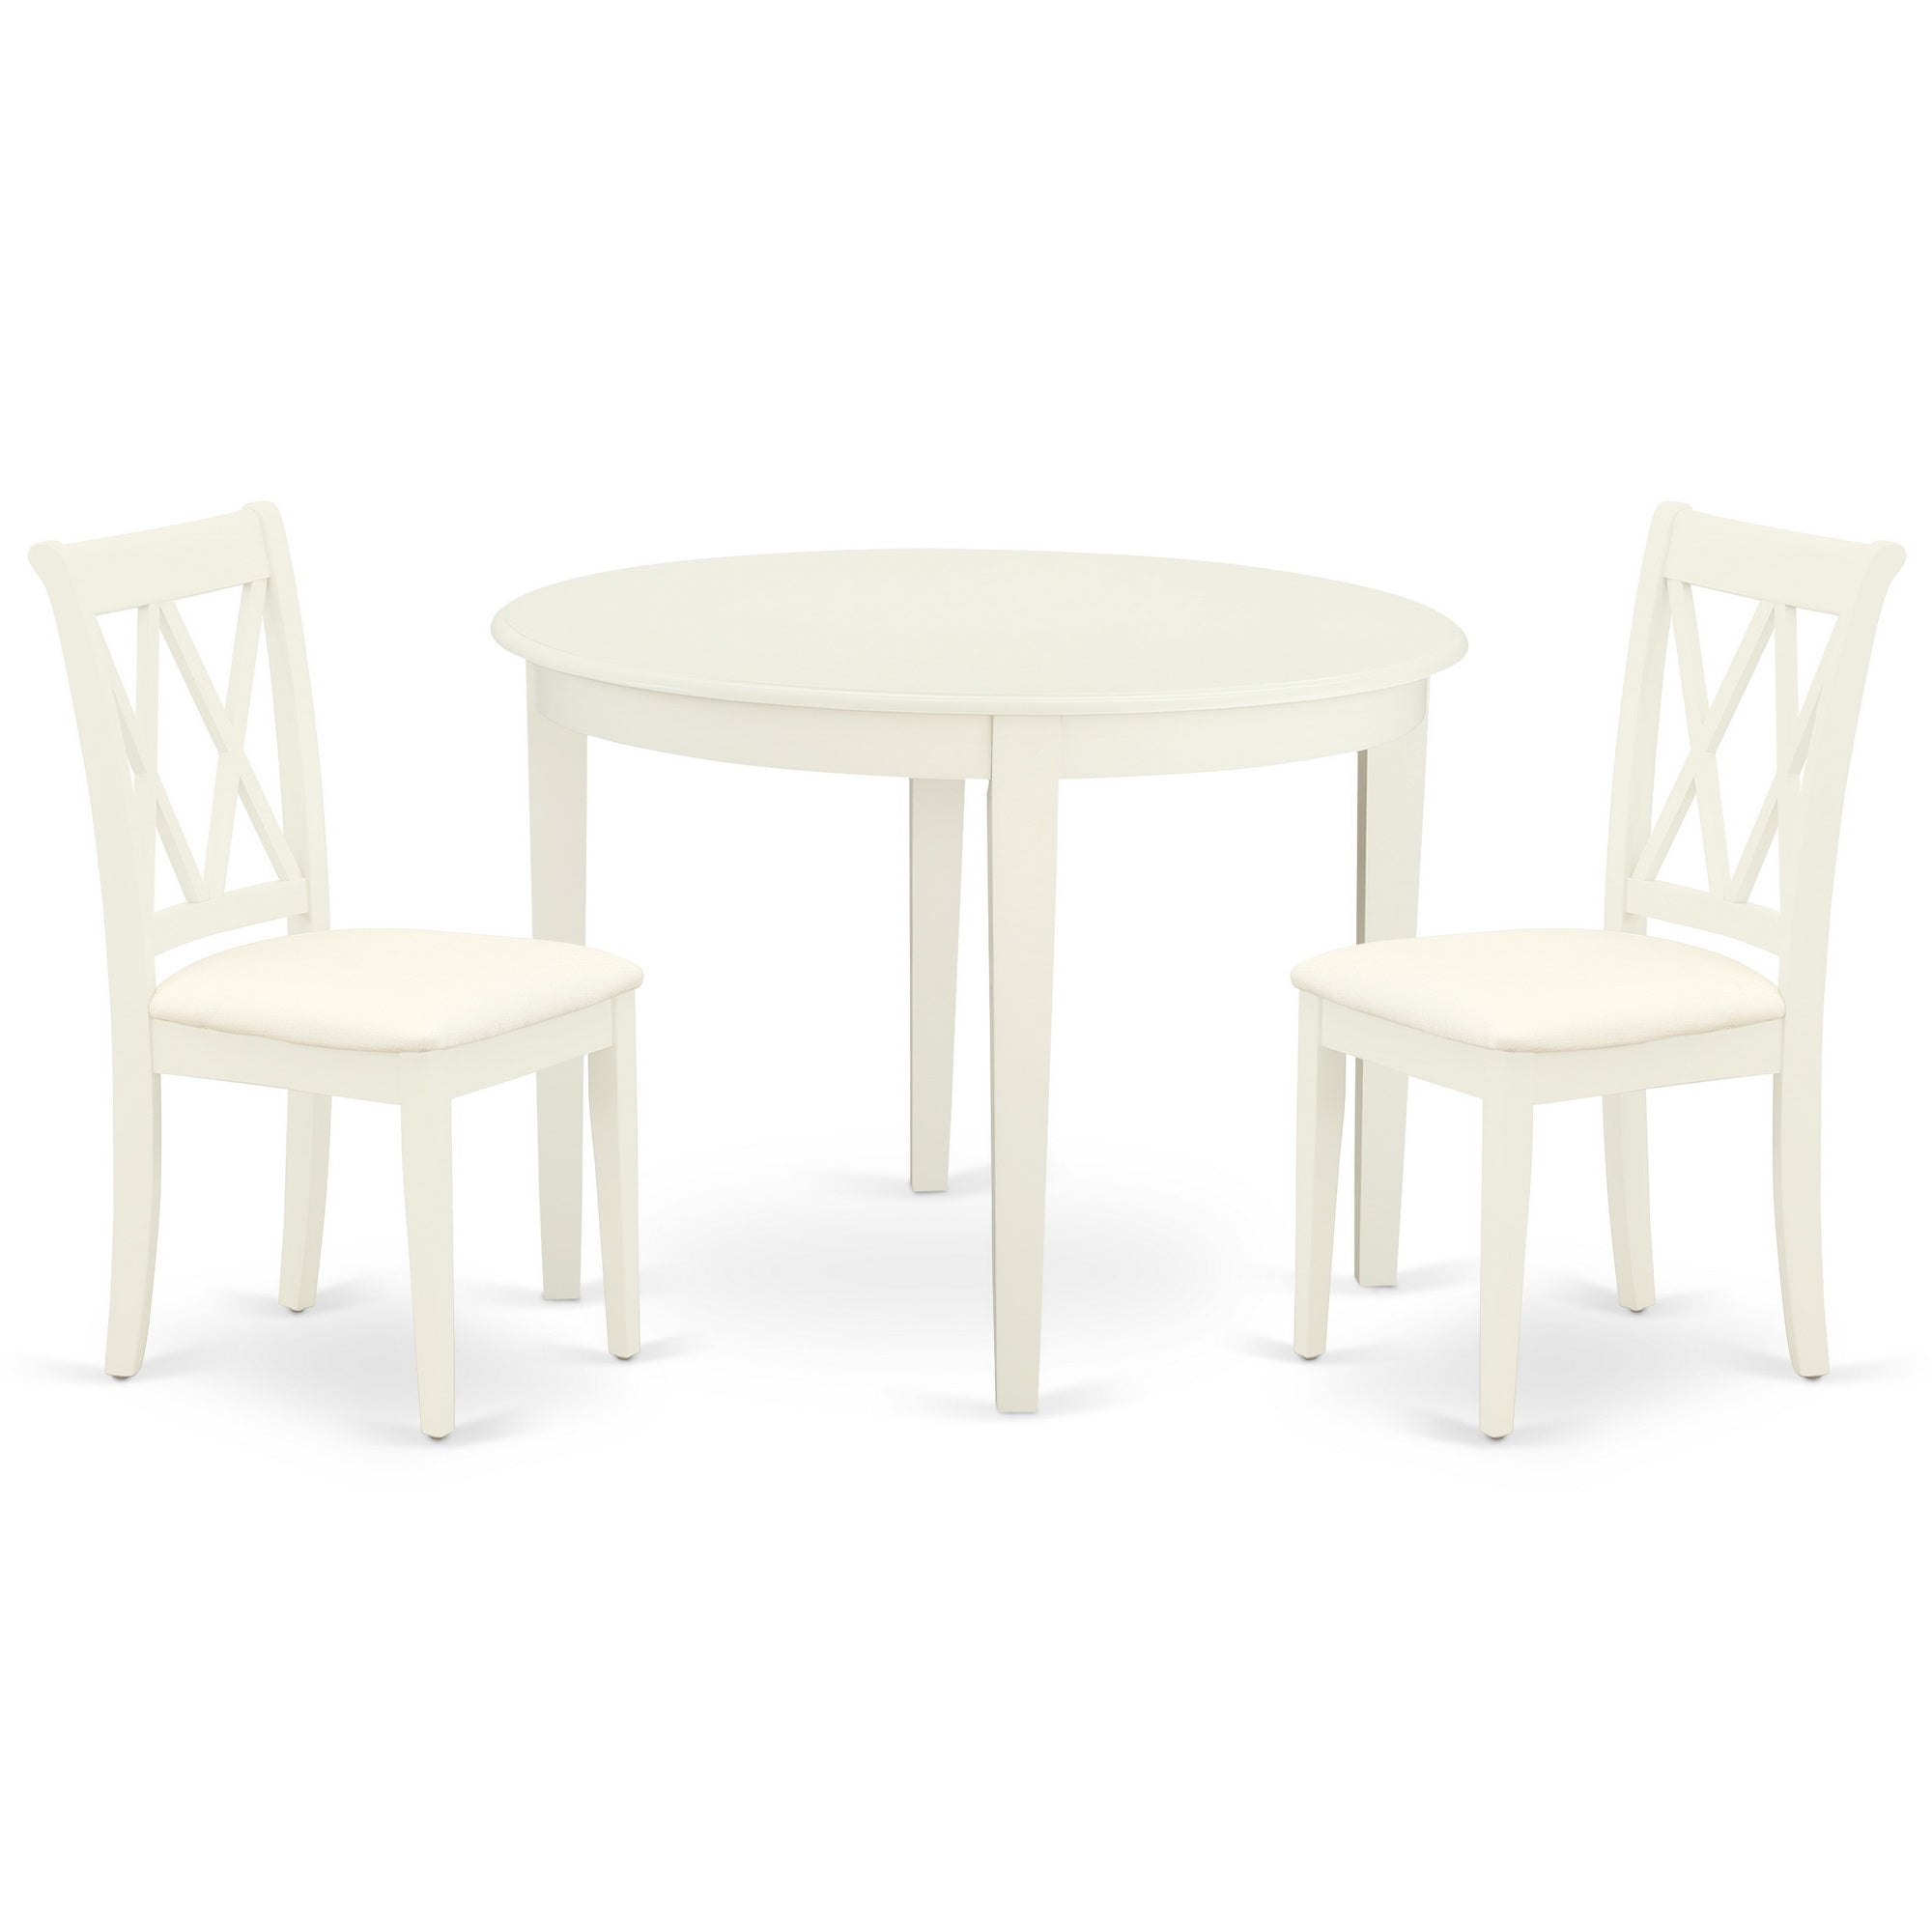 BOCL3-WHI-C 3Pc Dinette Set Includes a Rounded Kitchen Table and Two Double X Back Microfiber Seat Dining Chairs, White Finish